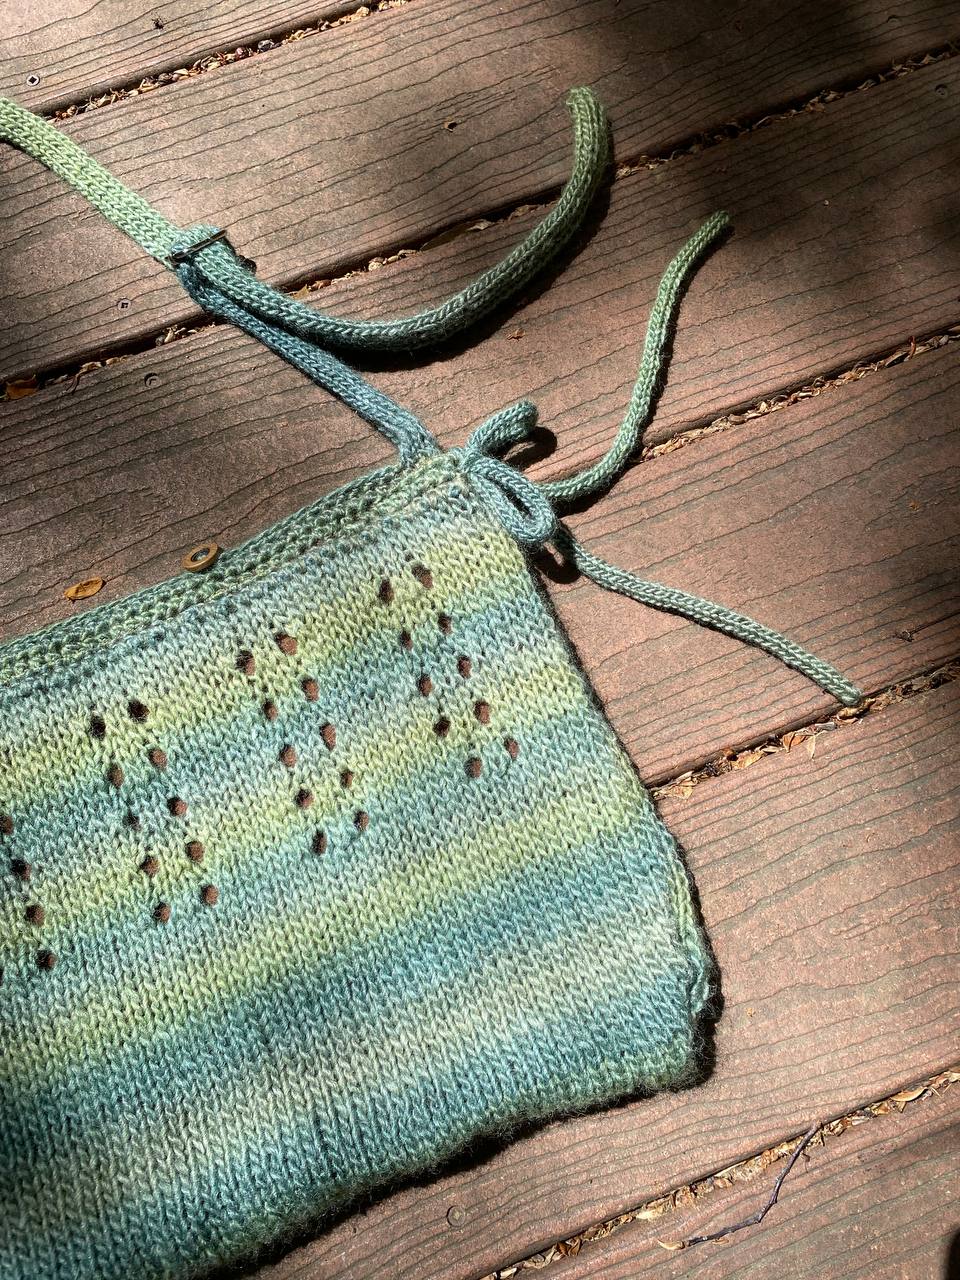 Bag No. 2 - Lace-y Forest